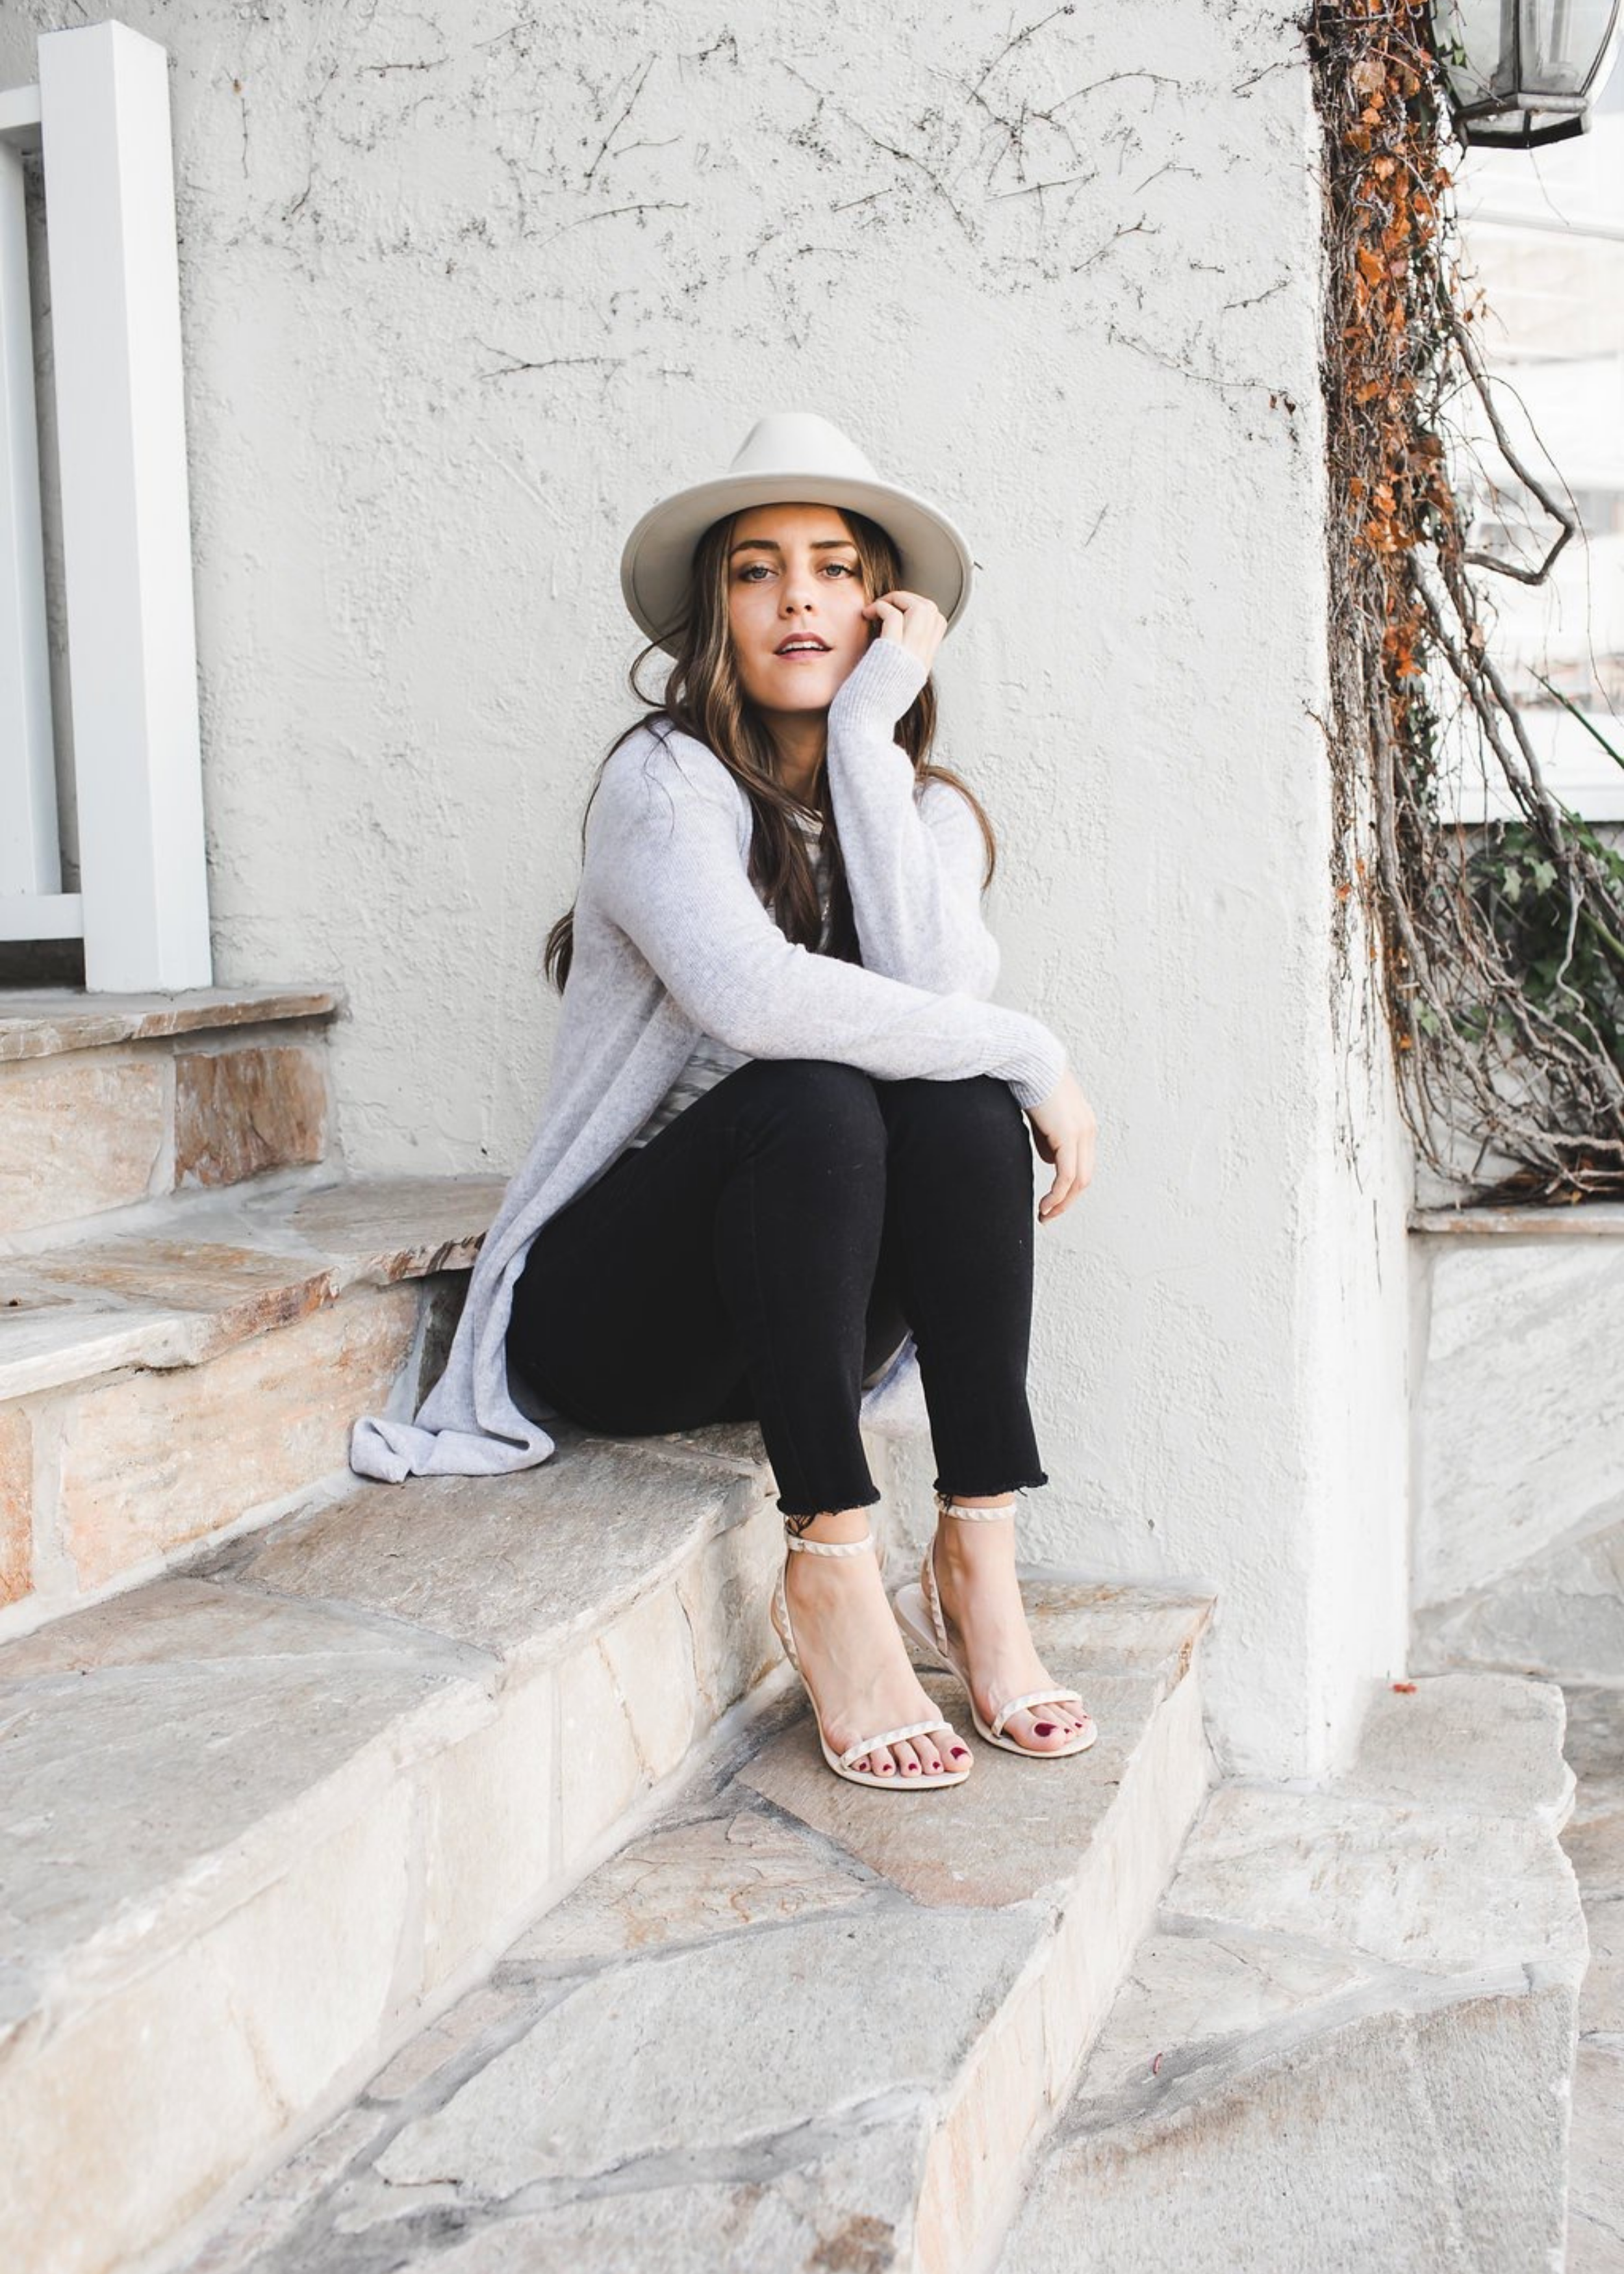 @karla_jordan3 sitting down  wearing Aria sandals in Nude and a cute stylish outfit.